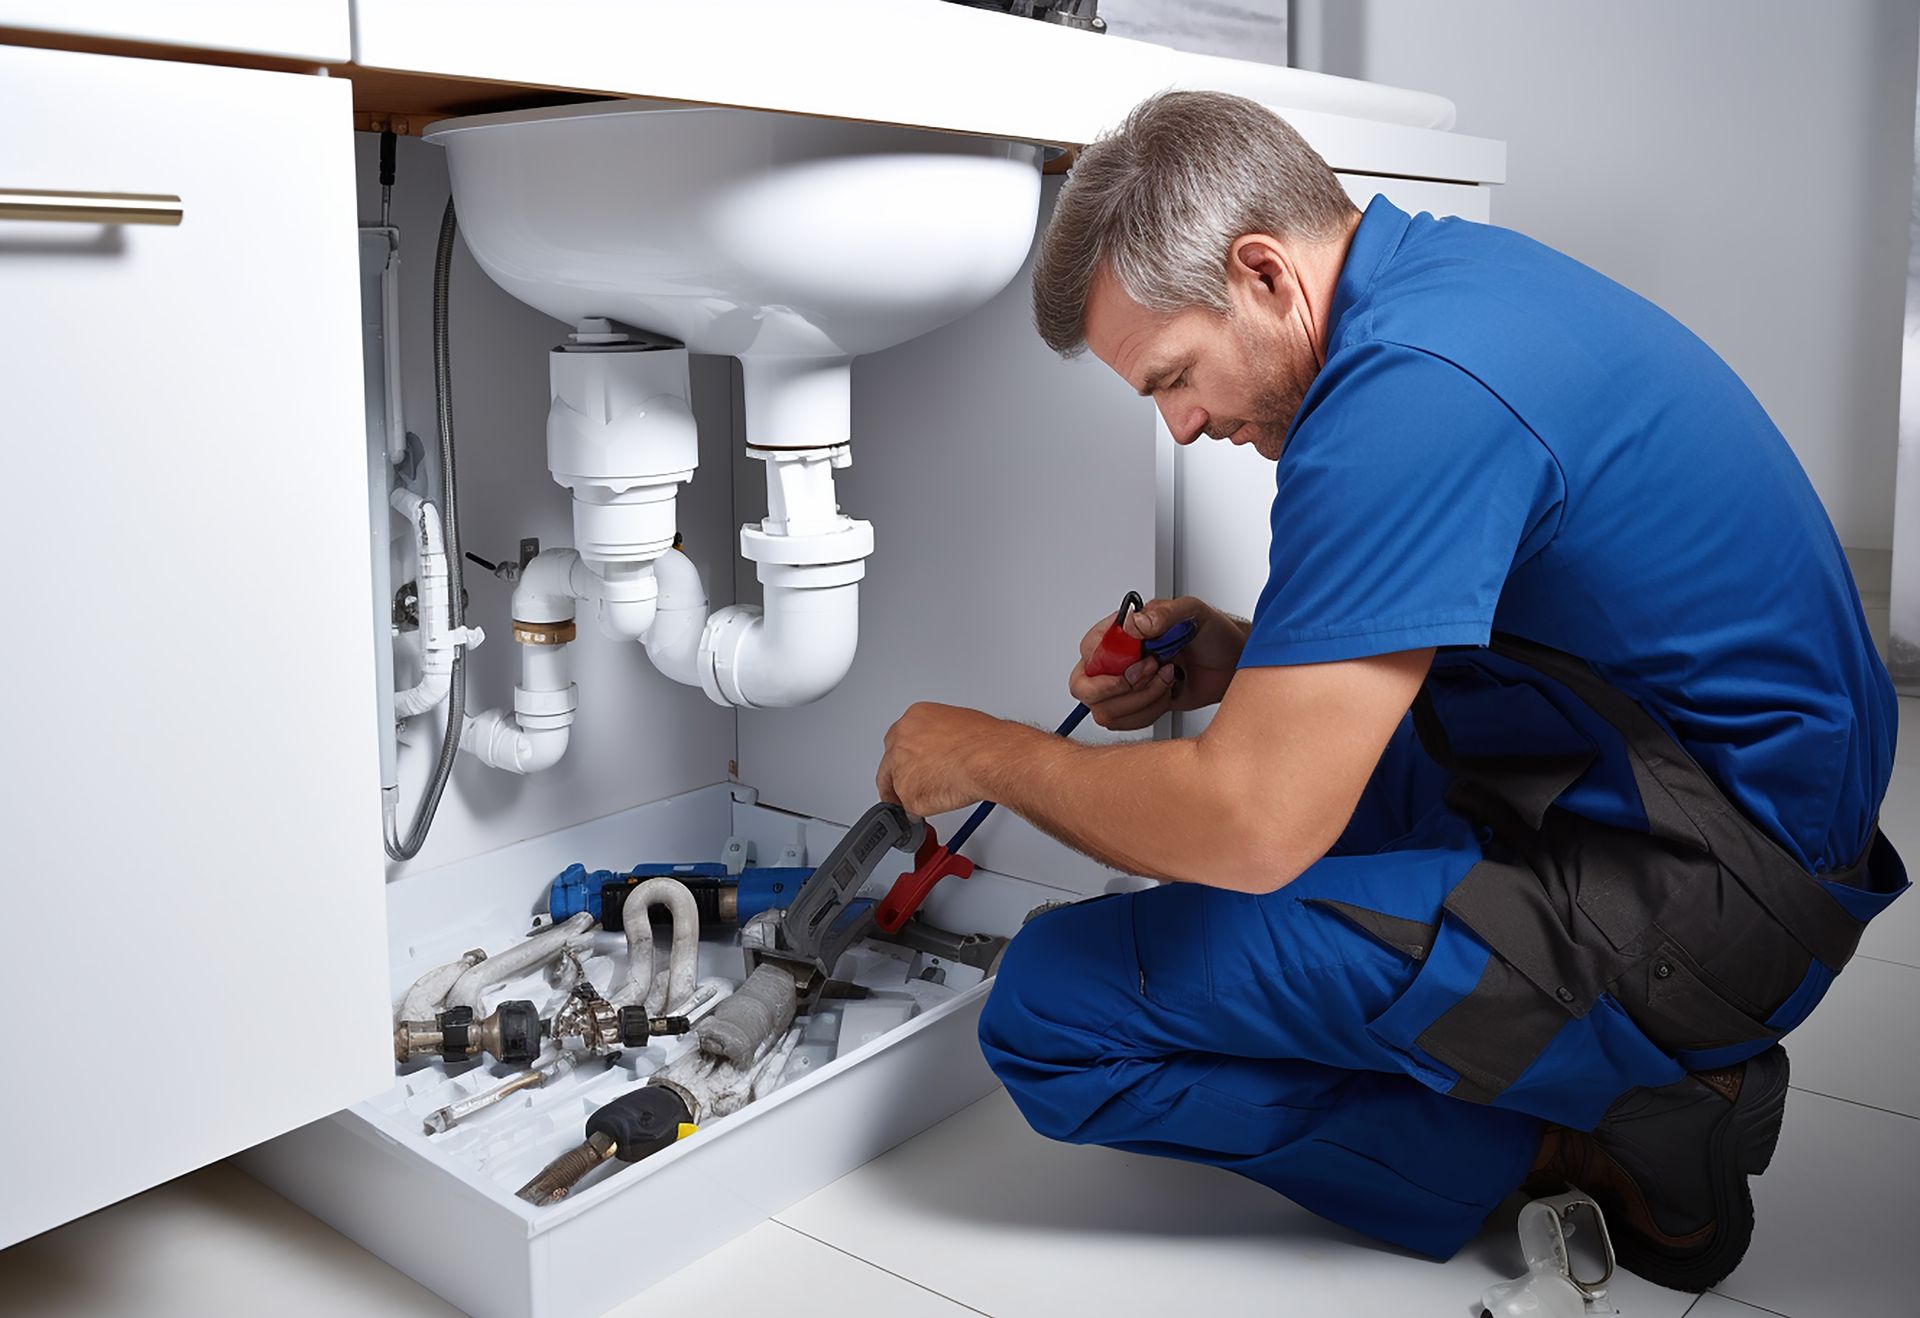 A plumber is working under a sink in a bathroom.